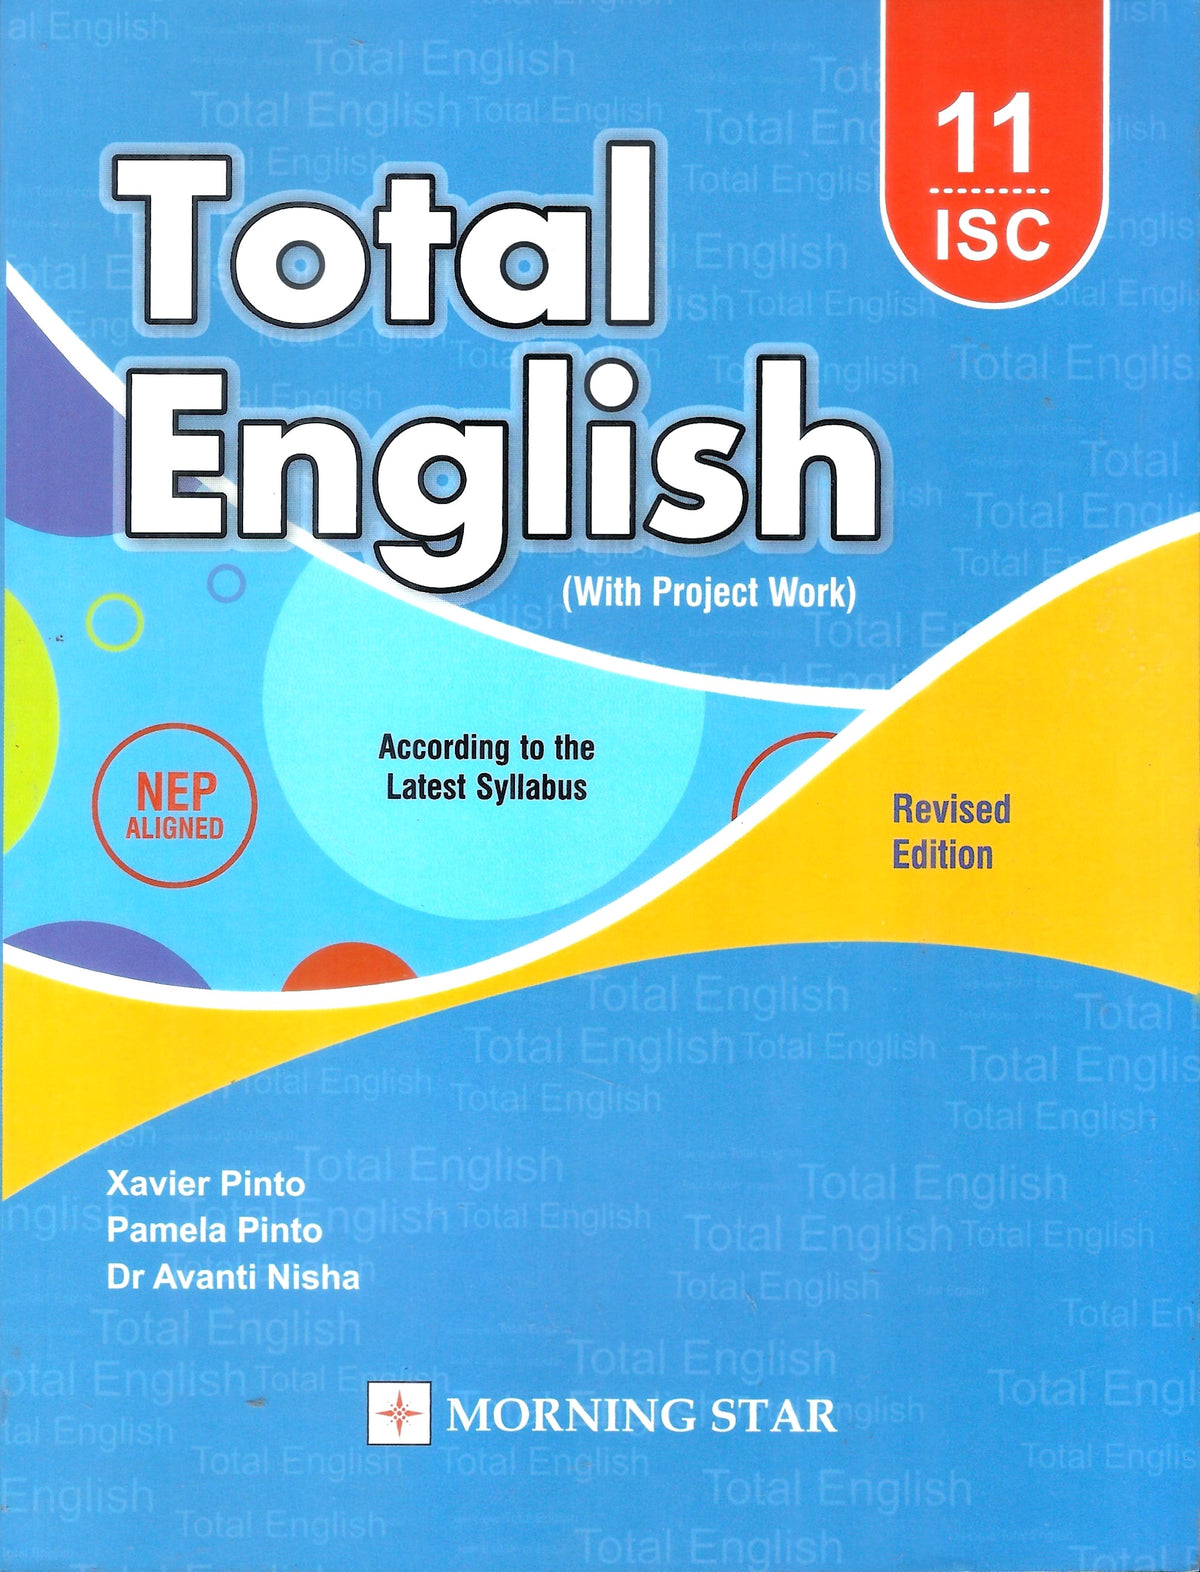 MORNING STAR ENGLISH TOTAL ISC 11